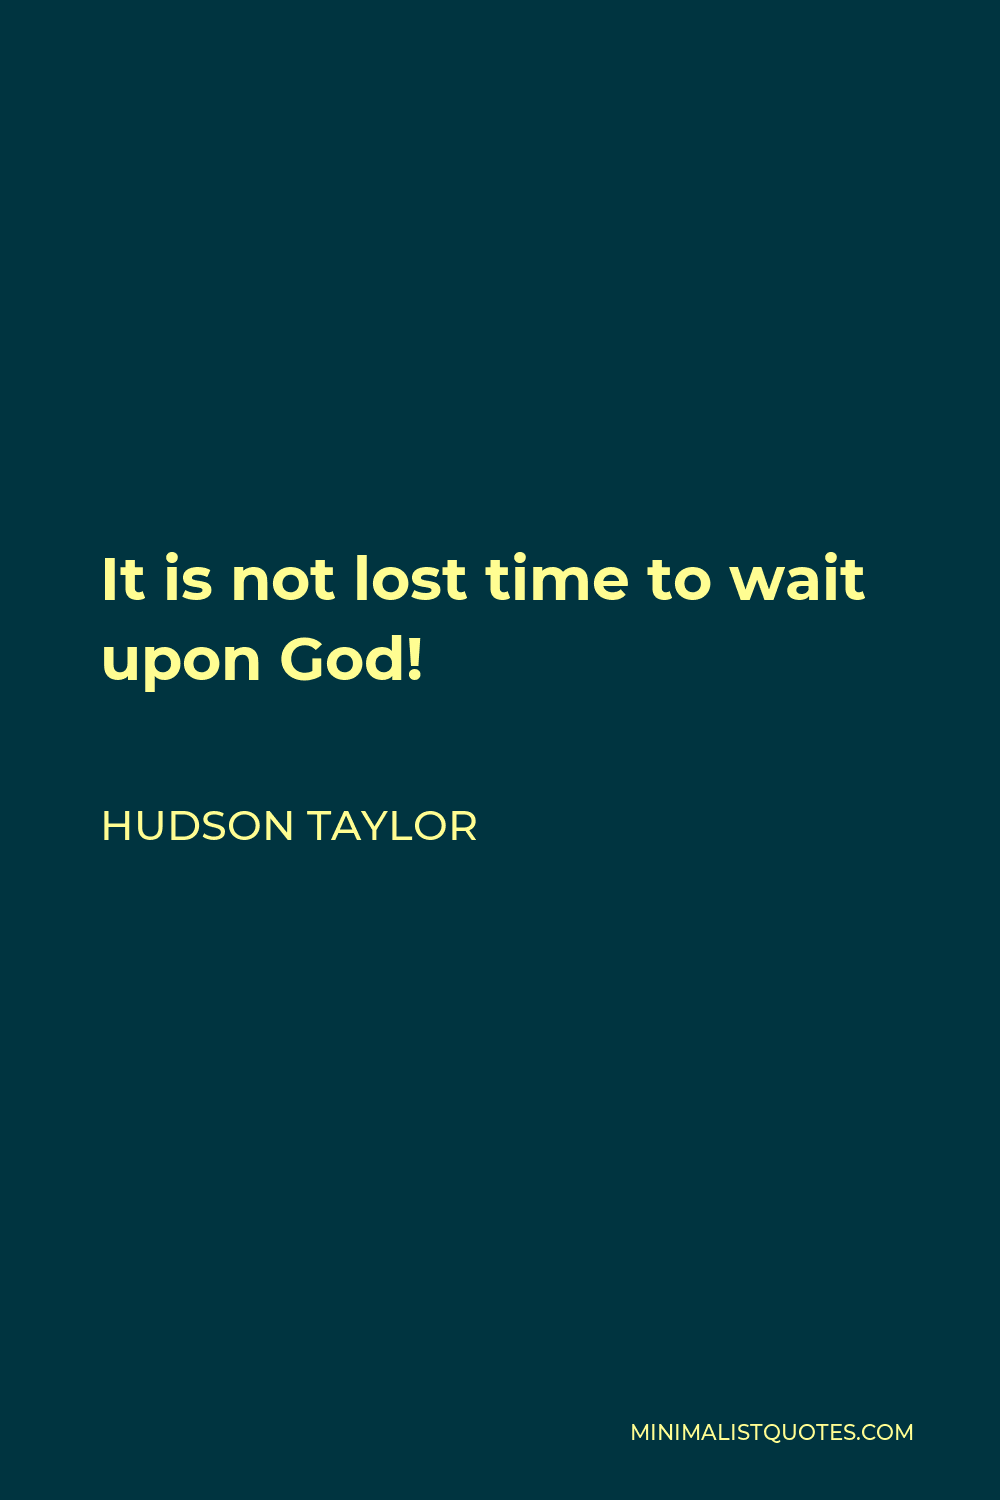 Hudson Taylor Quote - It is not lost time to wait upon God!